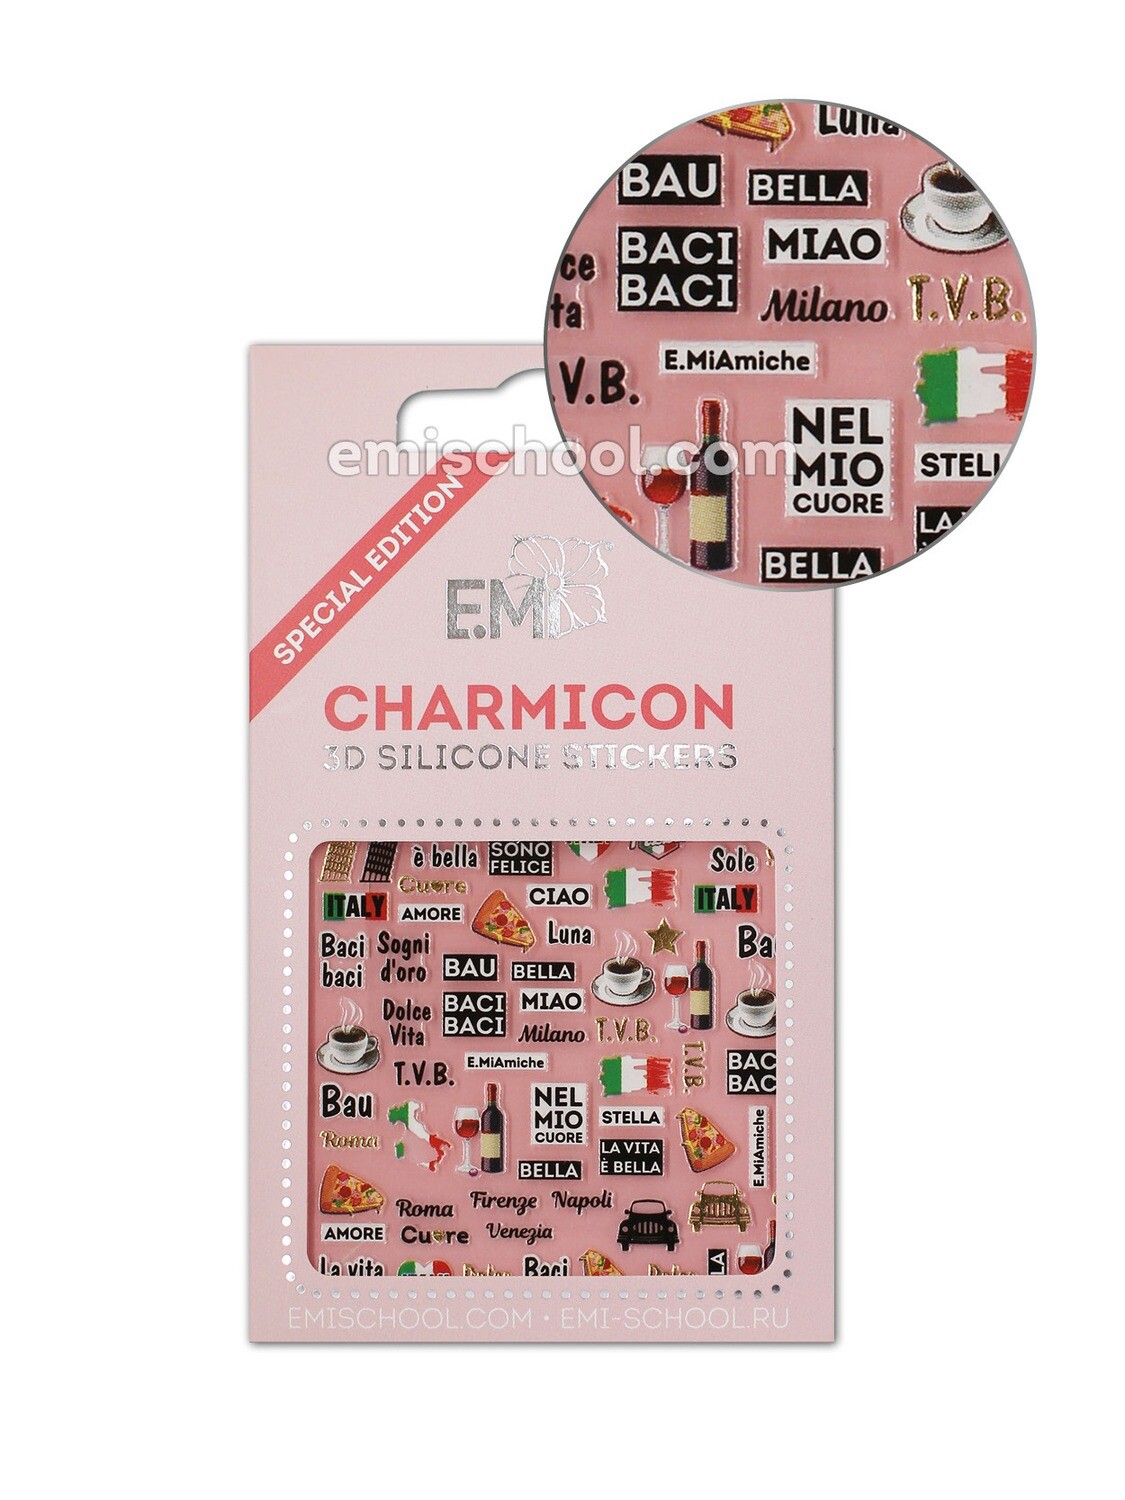 Charmicon 3D Silicone Stickers Italy 2